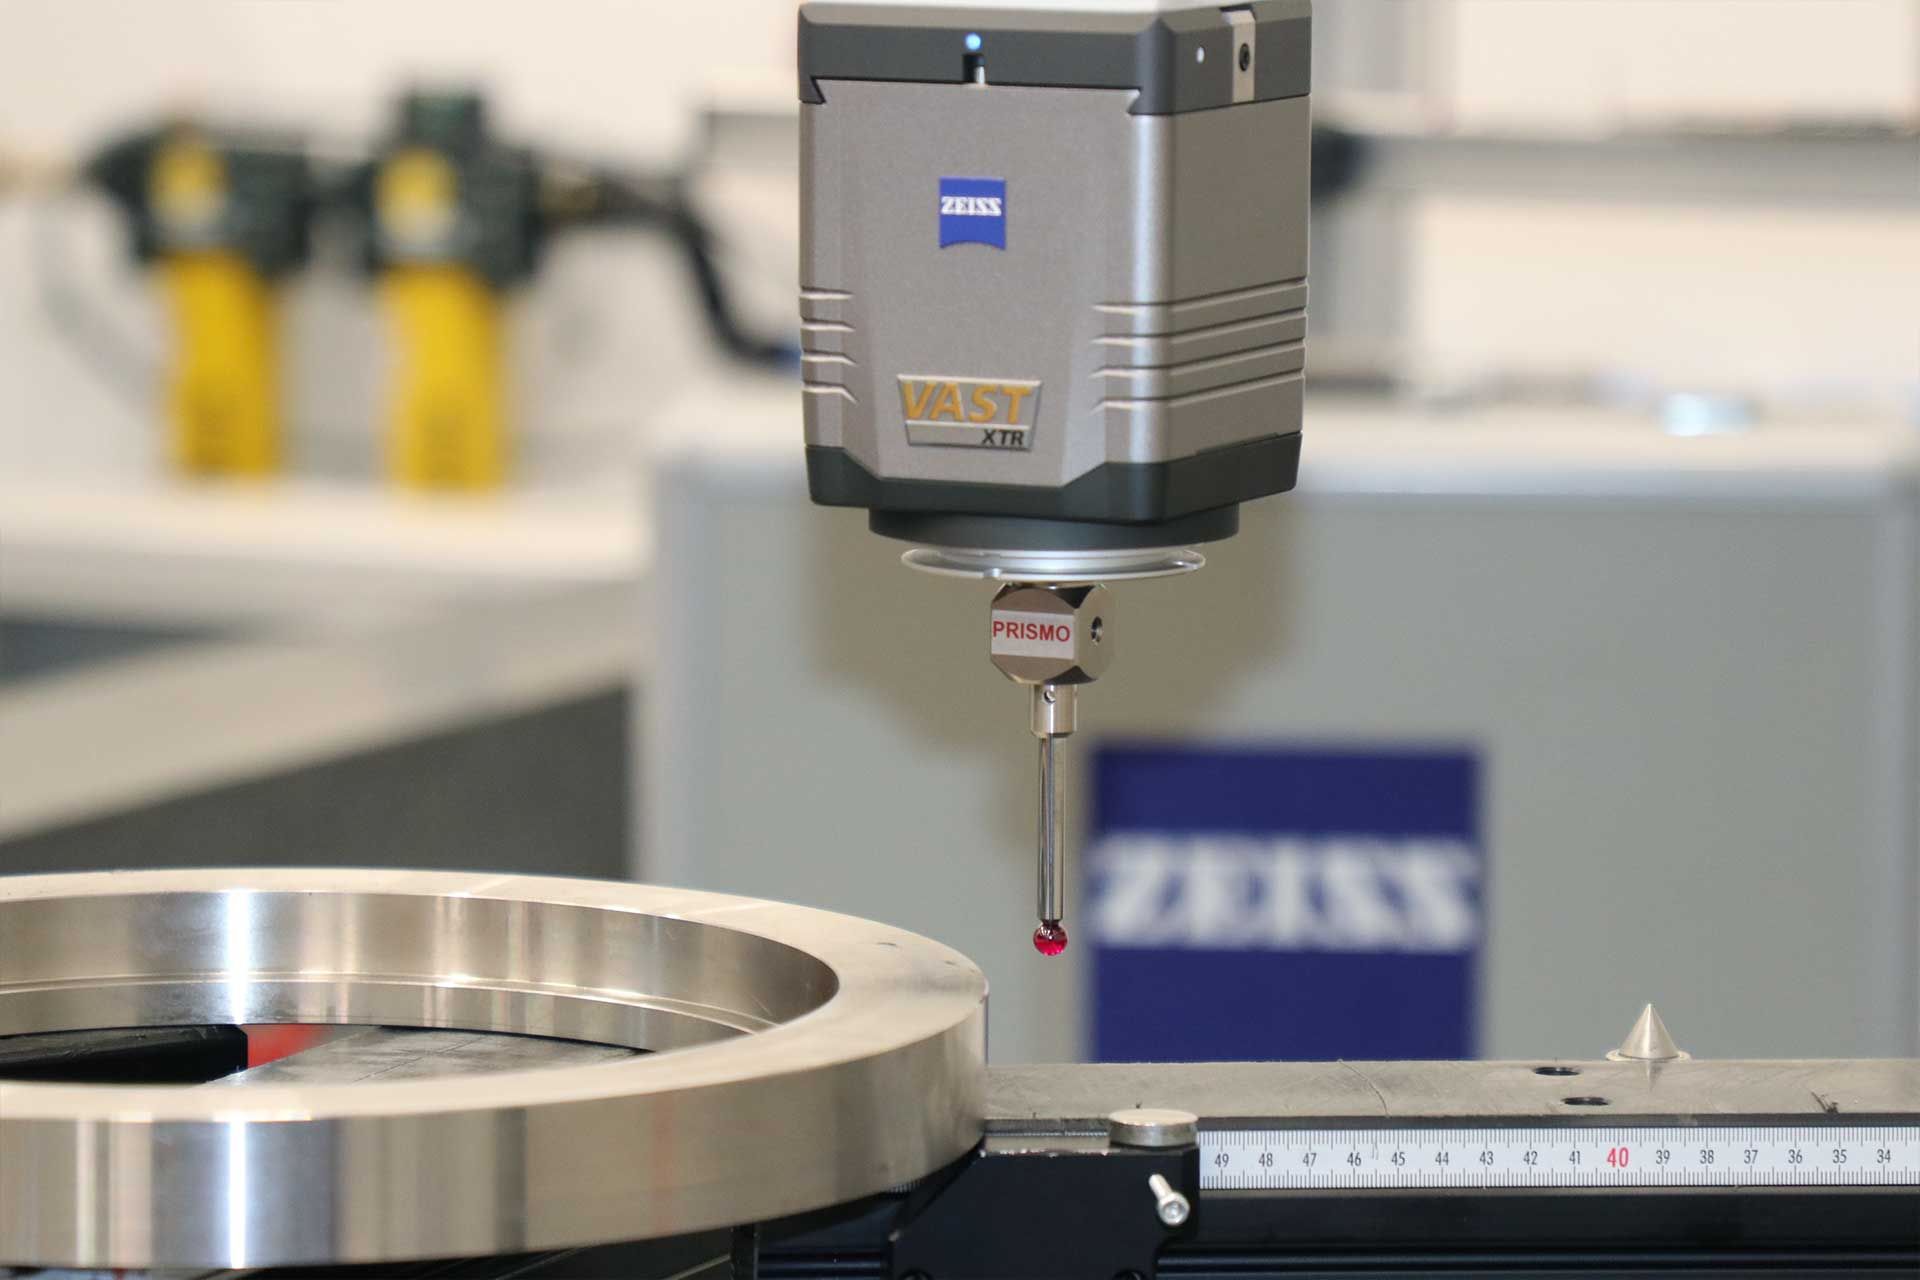 Zeiss Prismo Präzissionsmessung